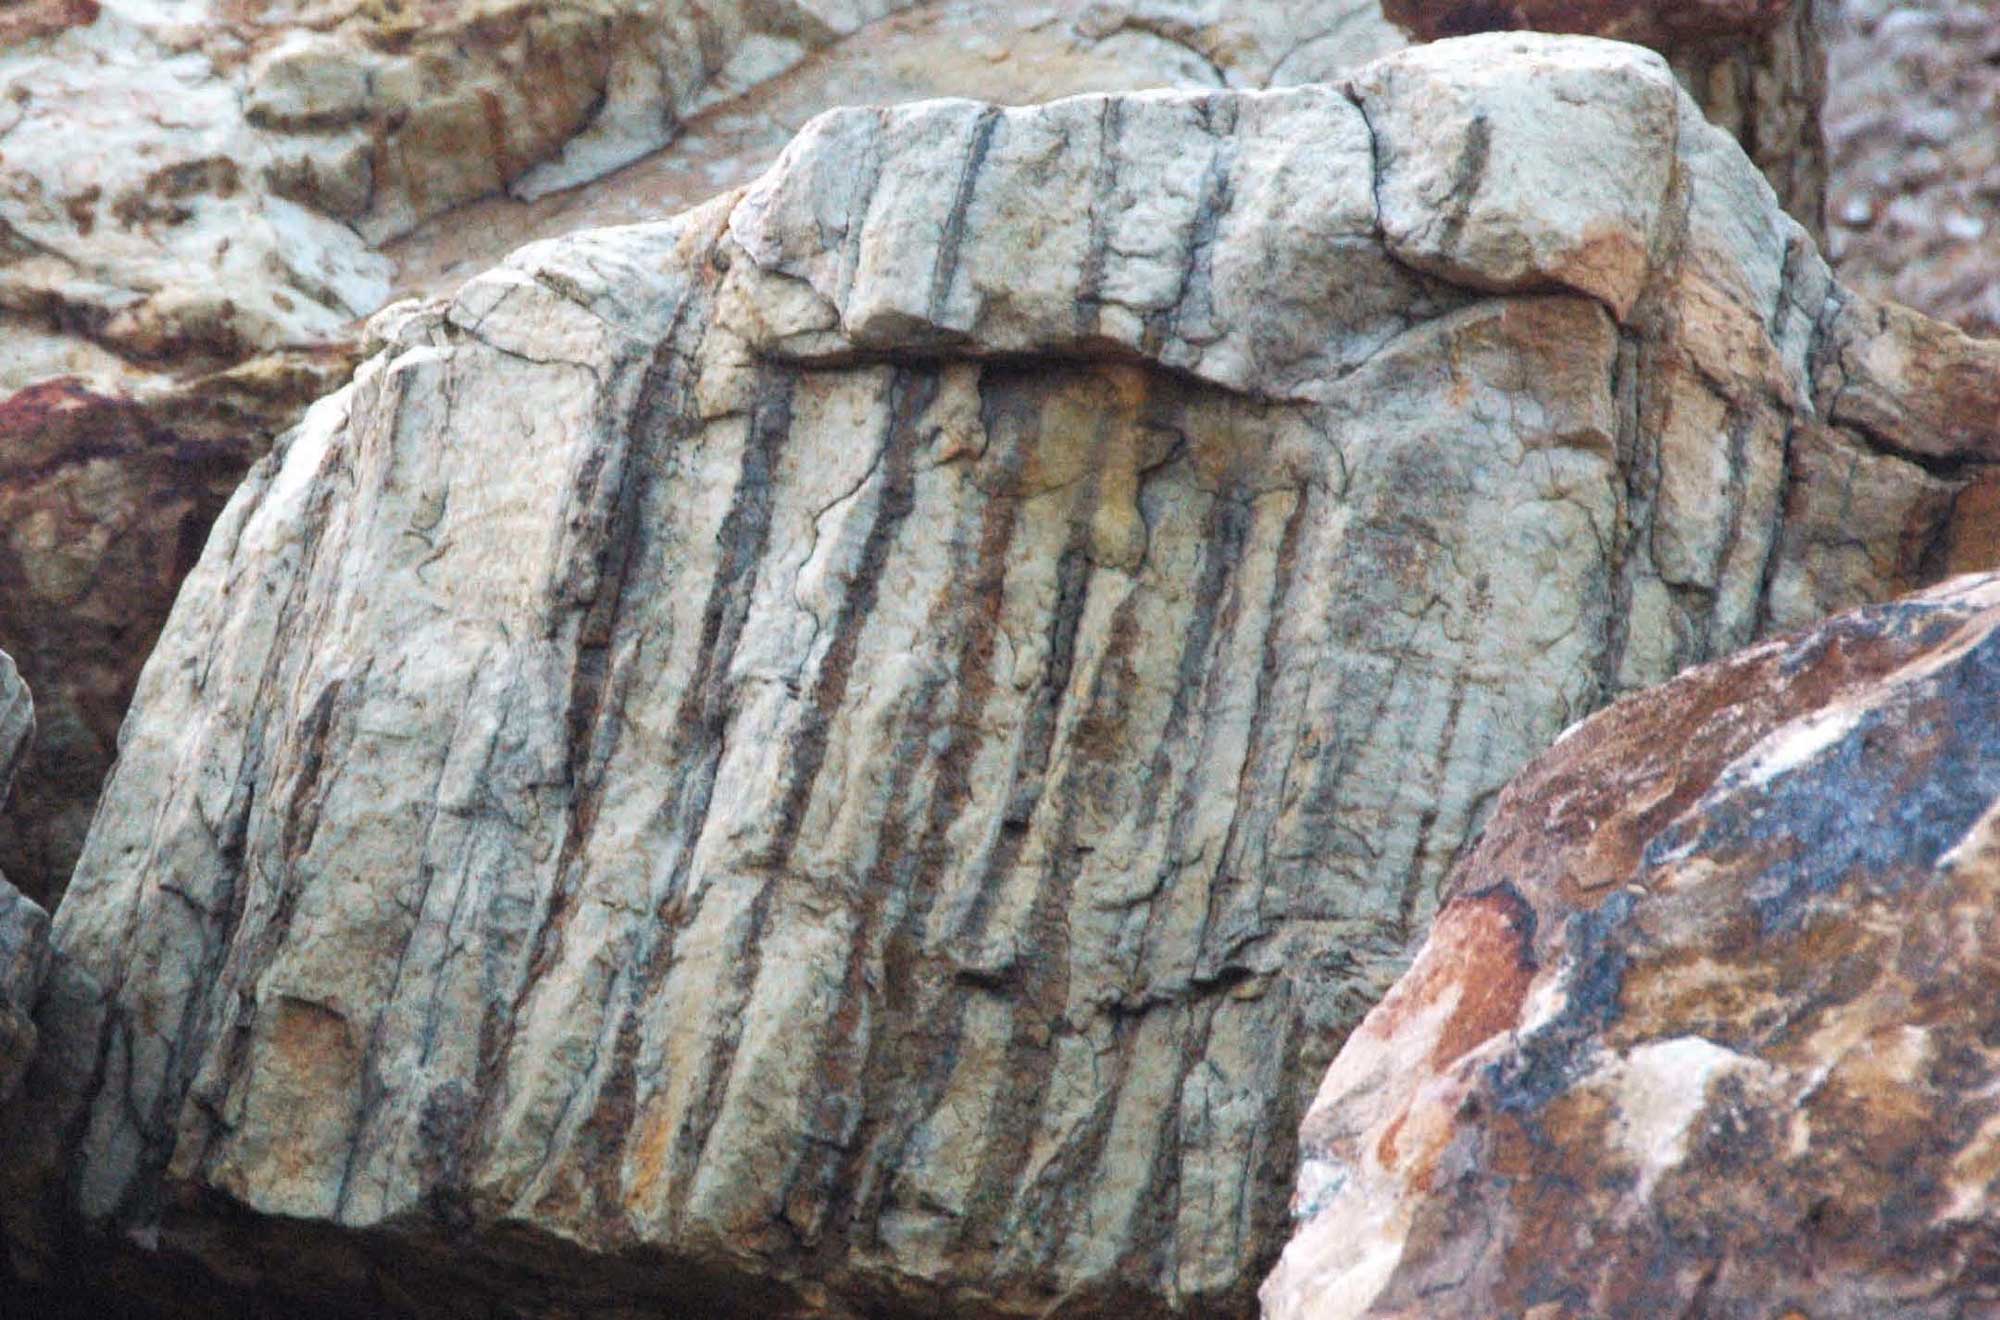 Color photograph of Skolithos burrows from the Silurian of Tennessee. Image shows a beige rock with slanting, vertical, dark streaks.